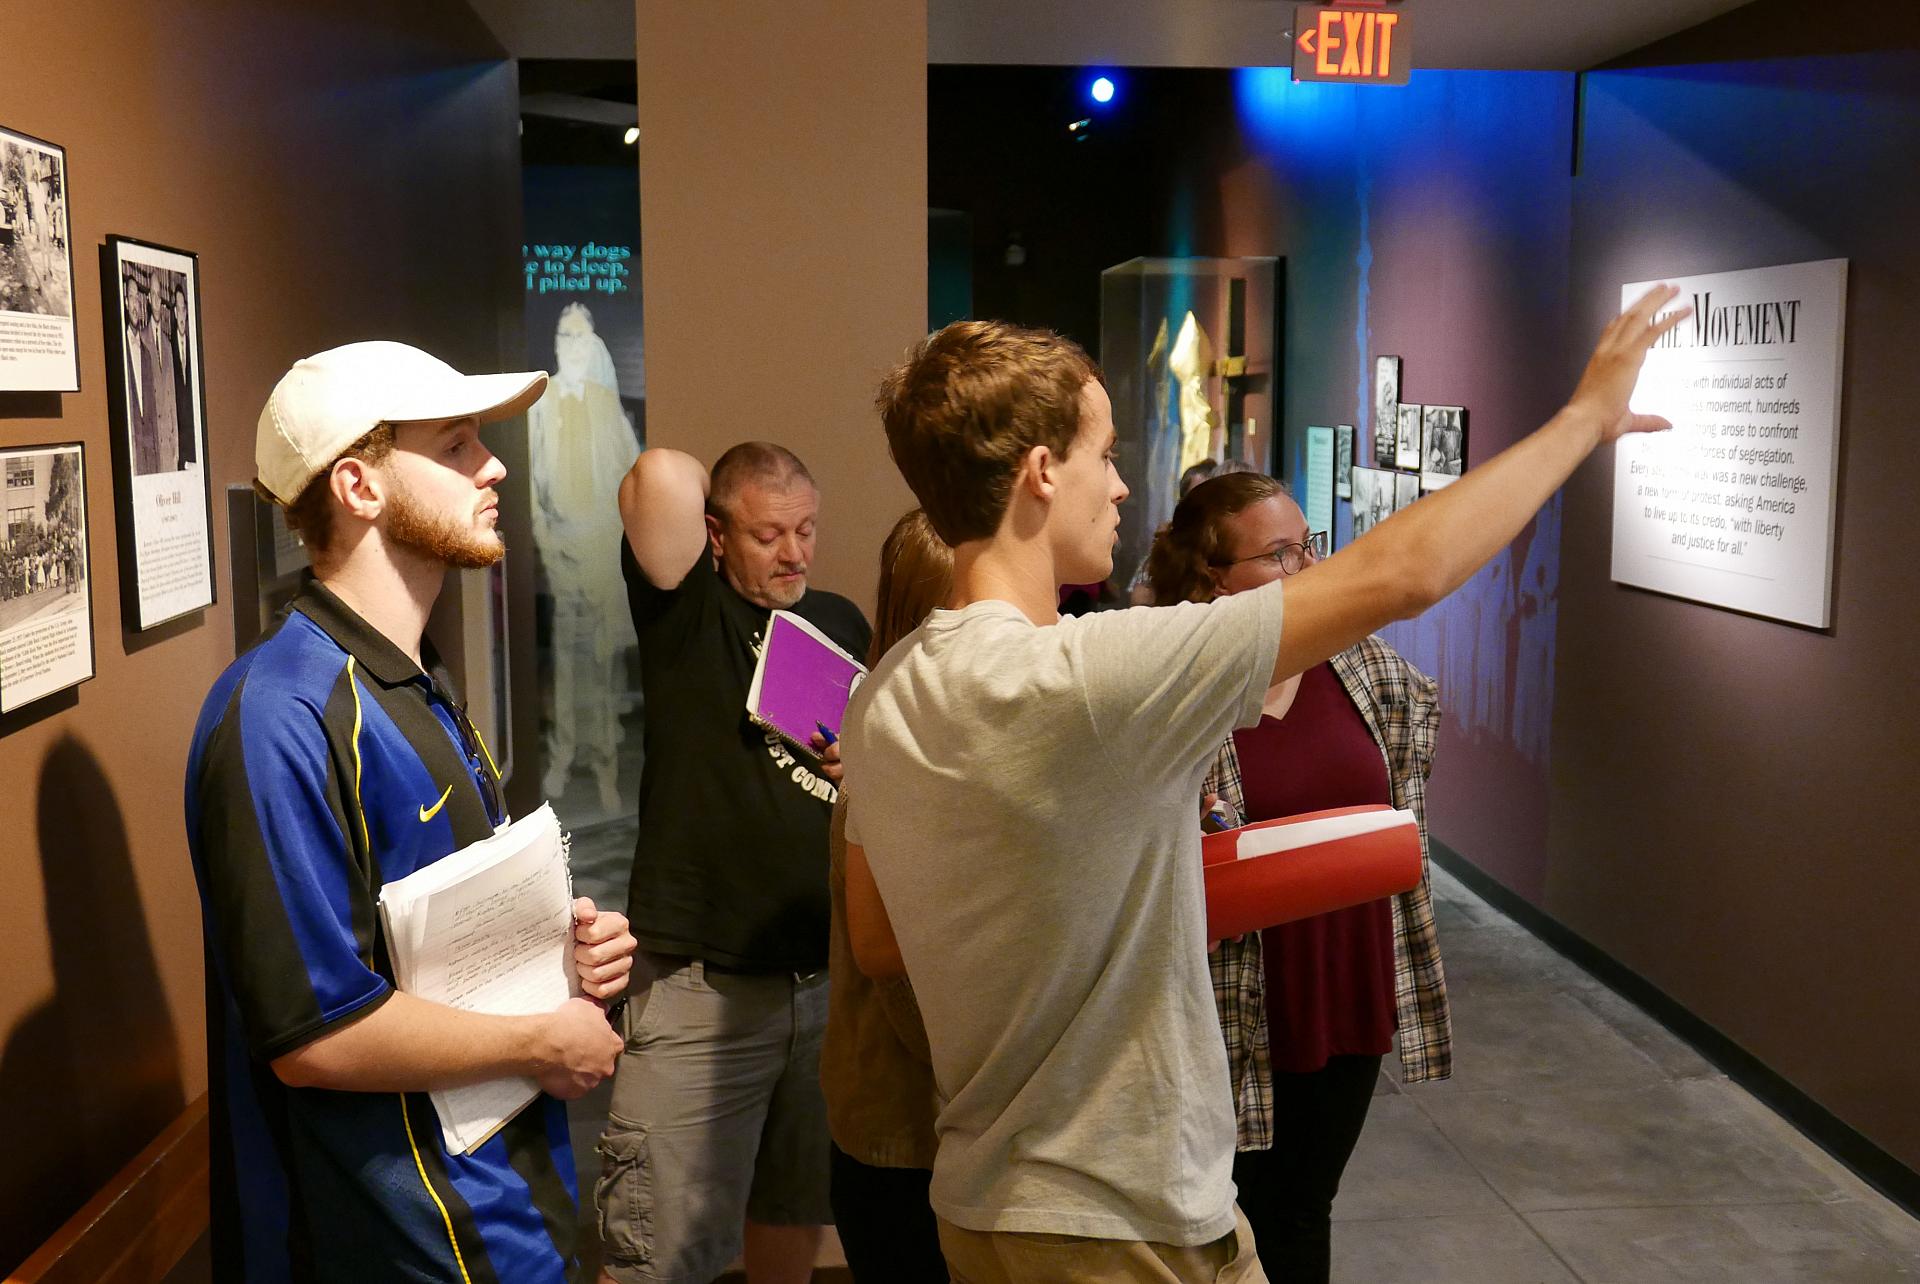 Students observing an exhibit at a museum